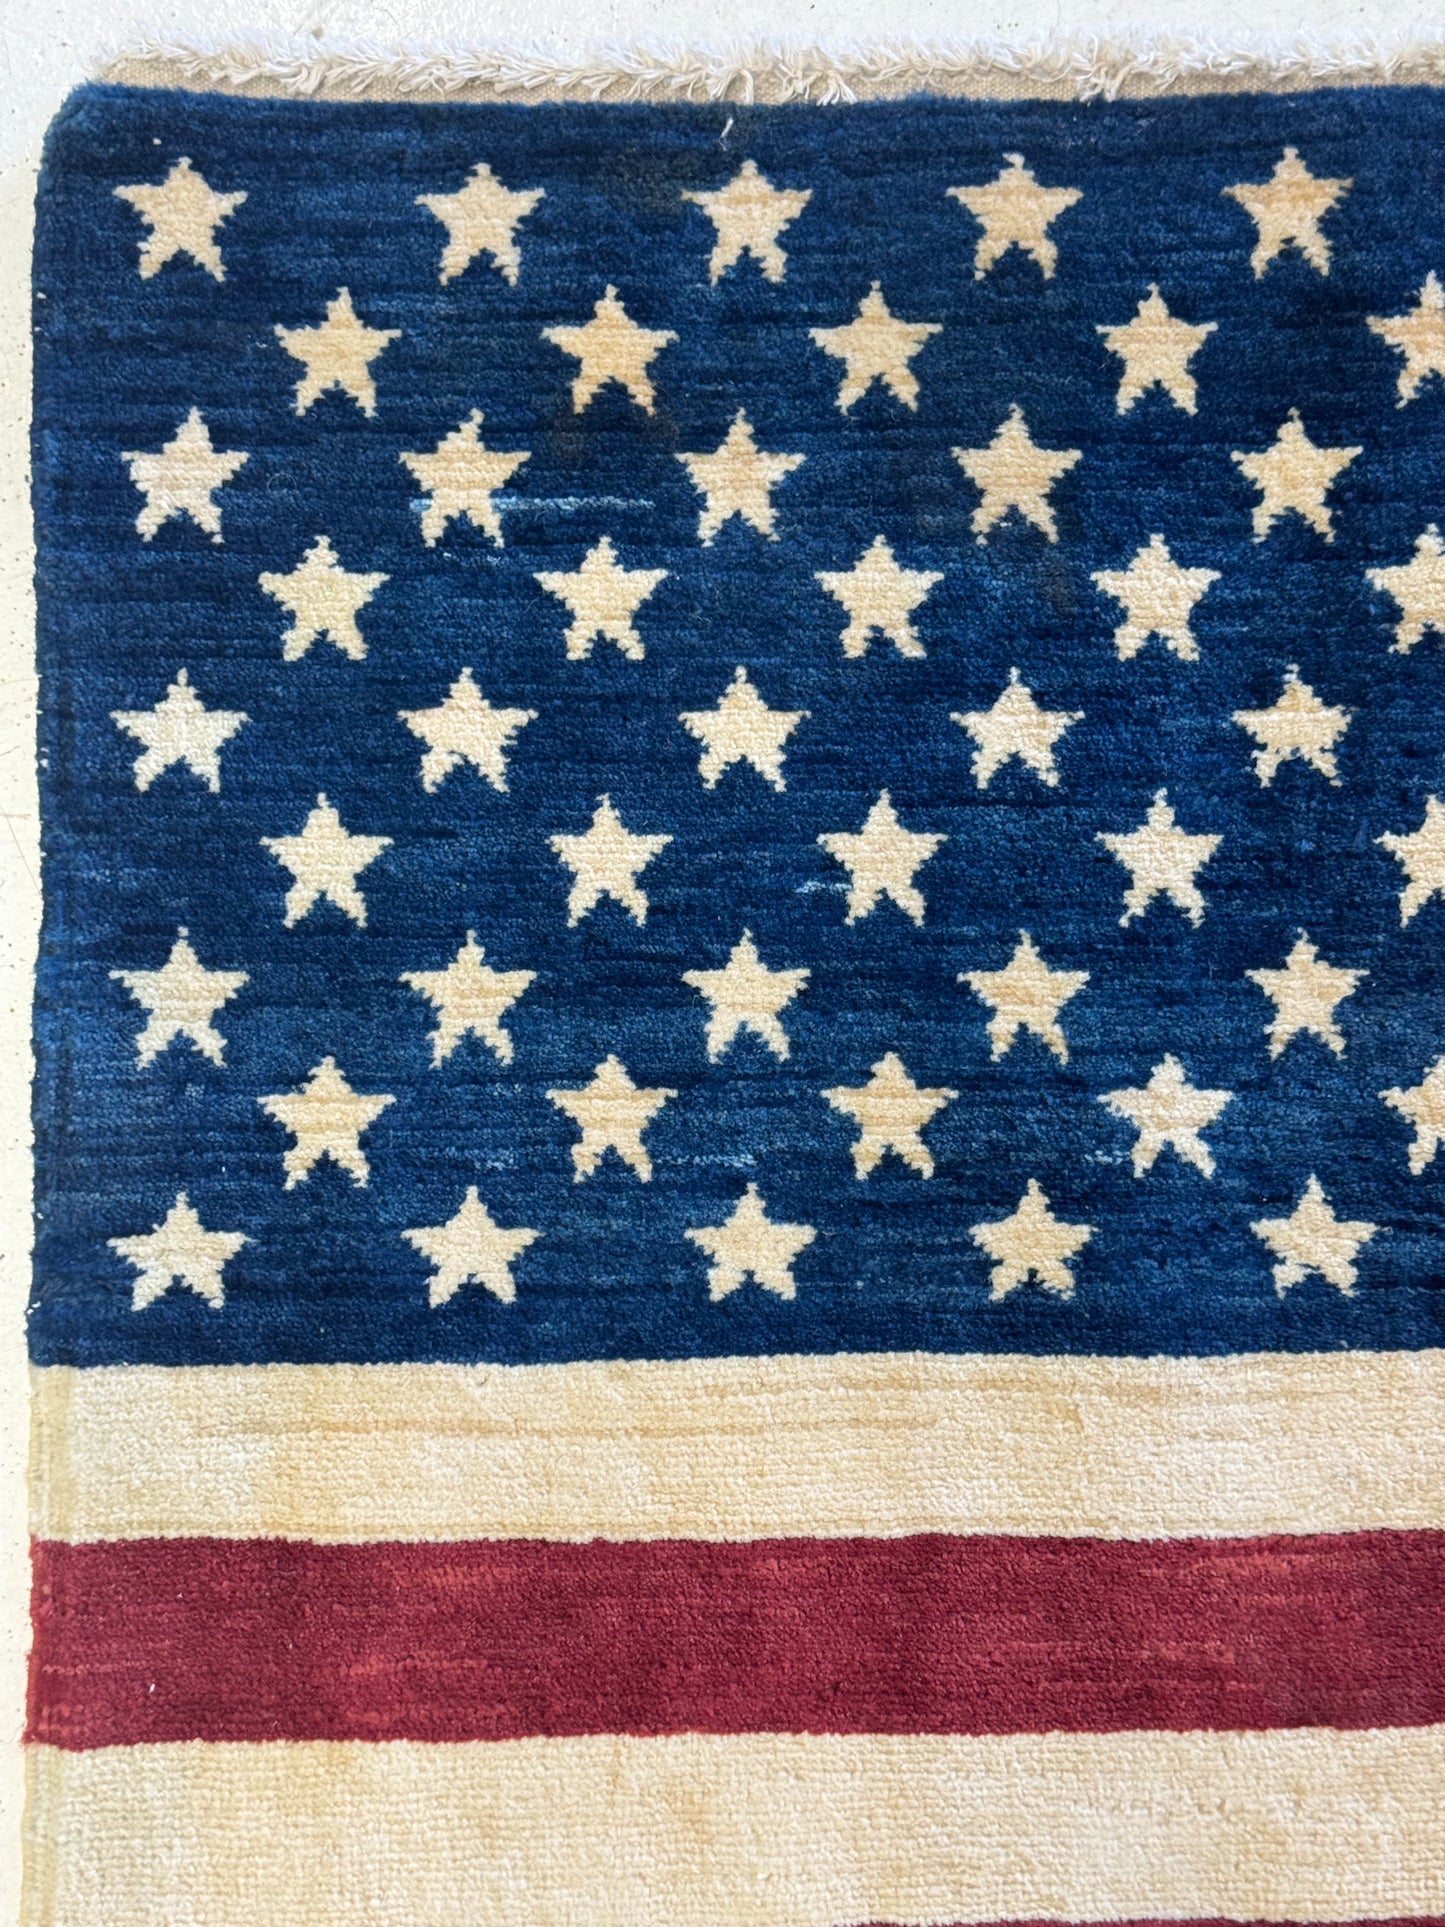 Modern Rug Image 5006 Hand Knotted Wool American Flag Wall Hanging